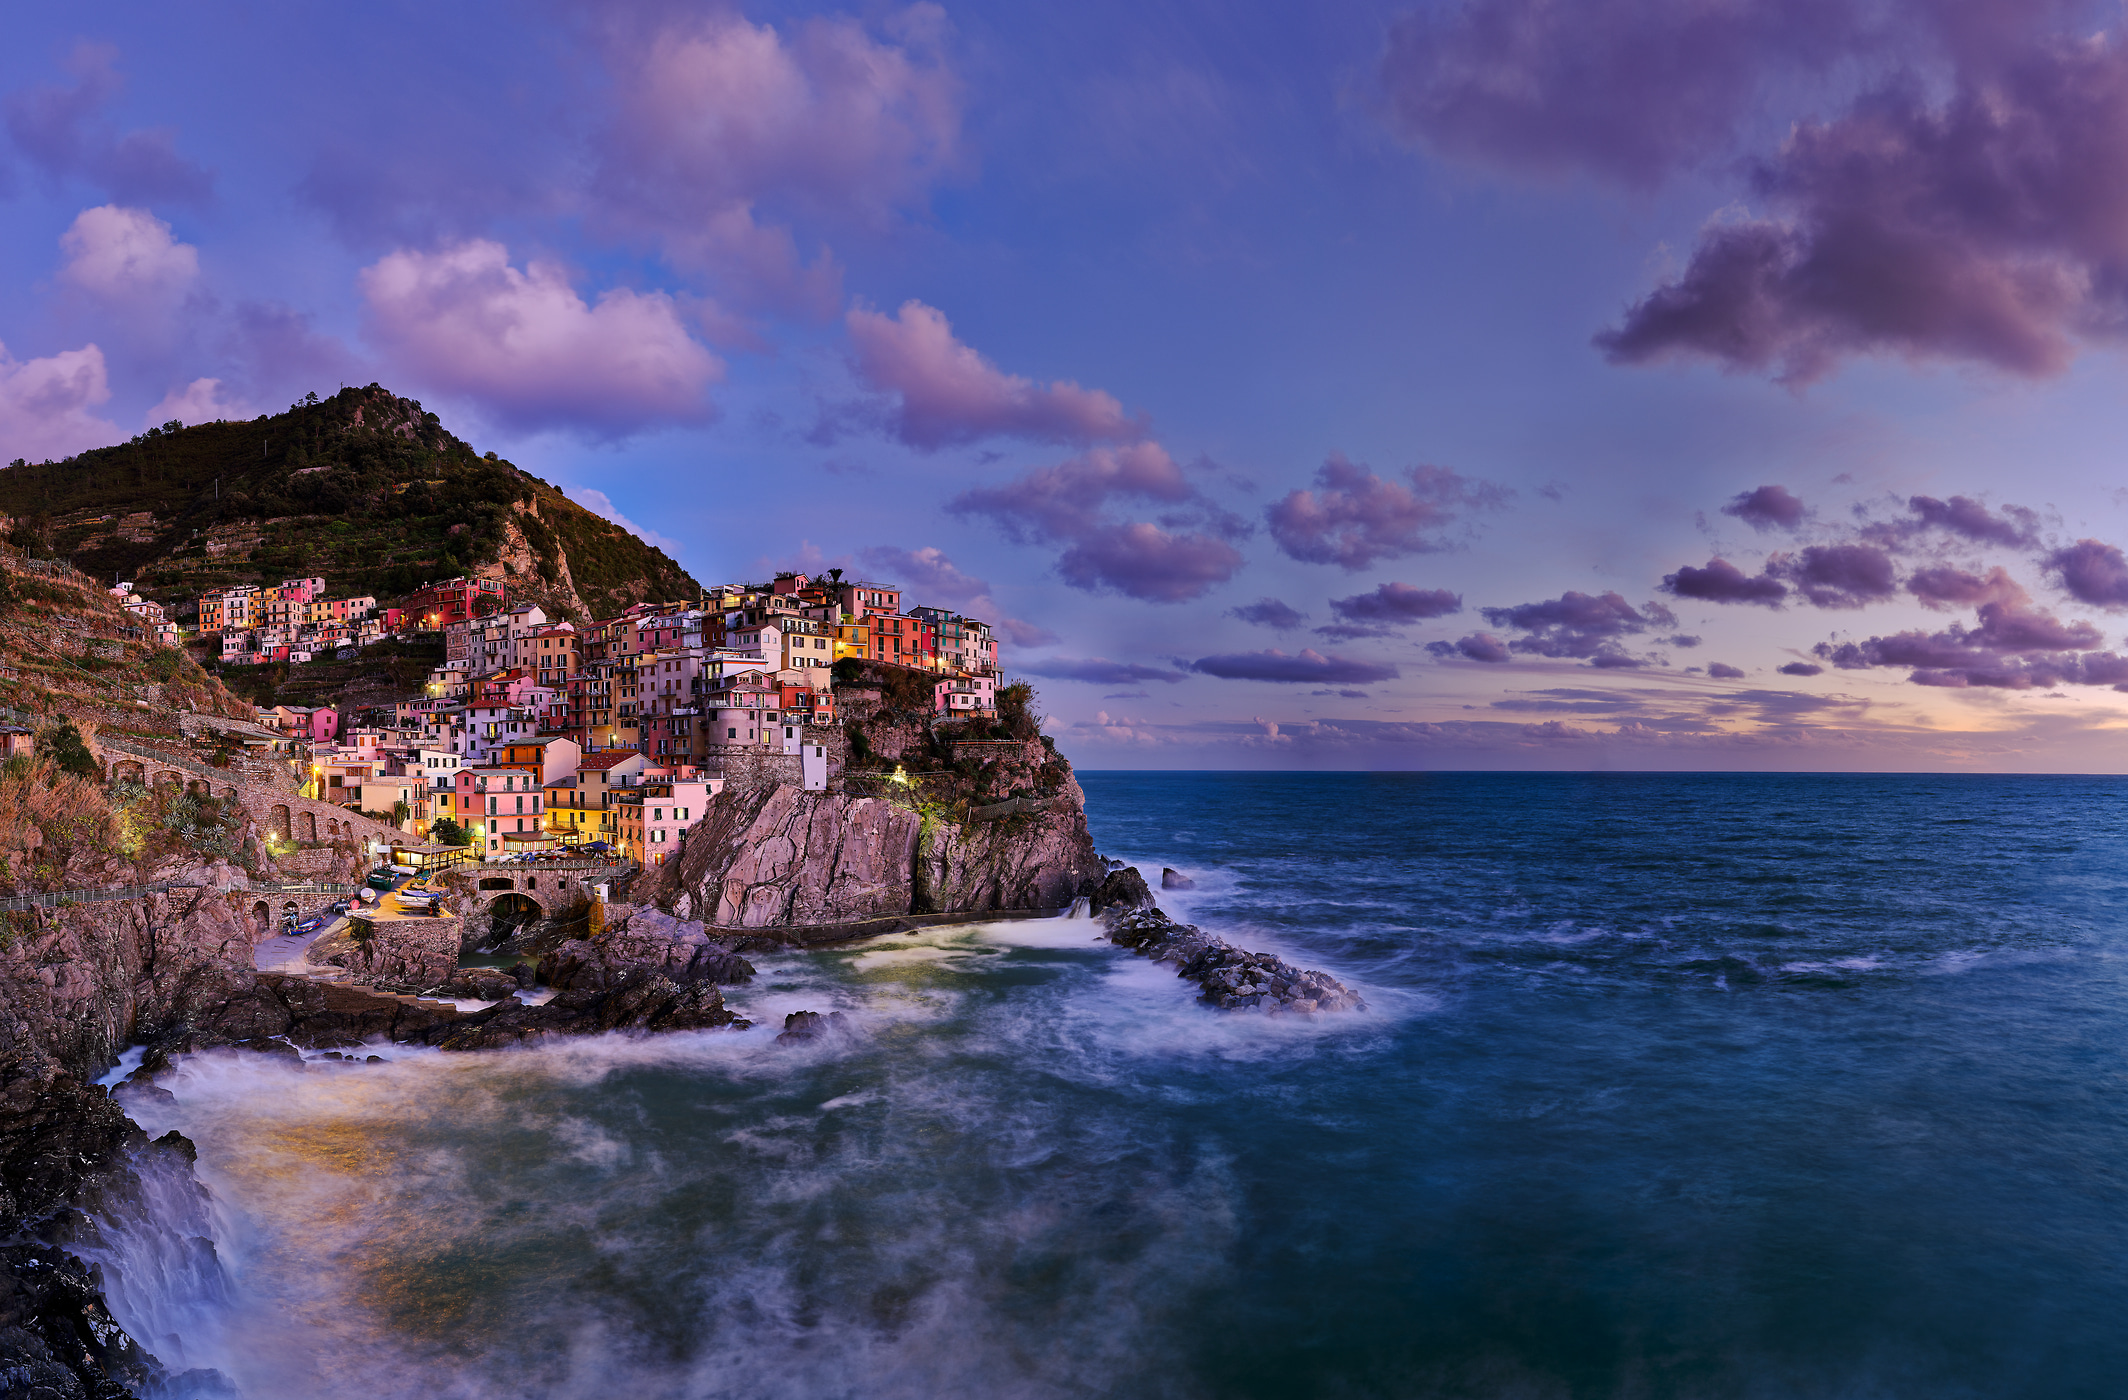 615 megapixels! A very high resolution, large-format VAST photo print of the Italian coastline at sunset; photograph created by David Meaux in Manarola, Cinque Terre, Liguria, Italy